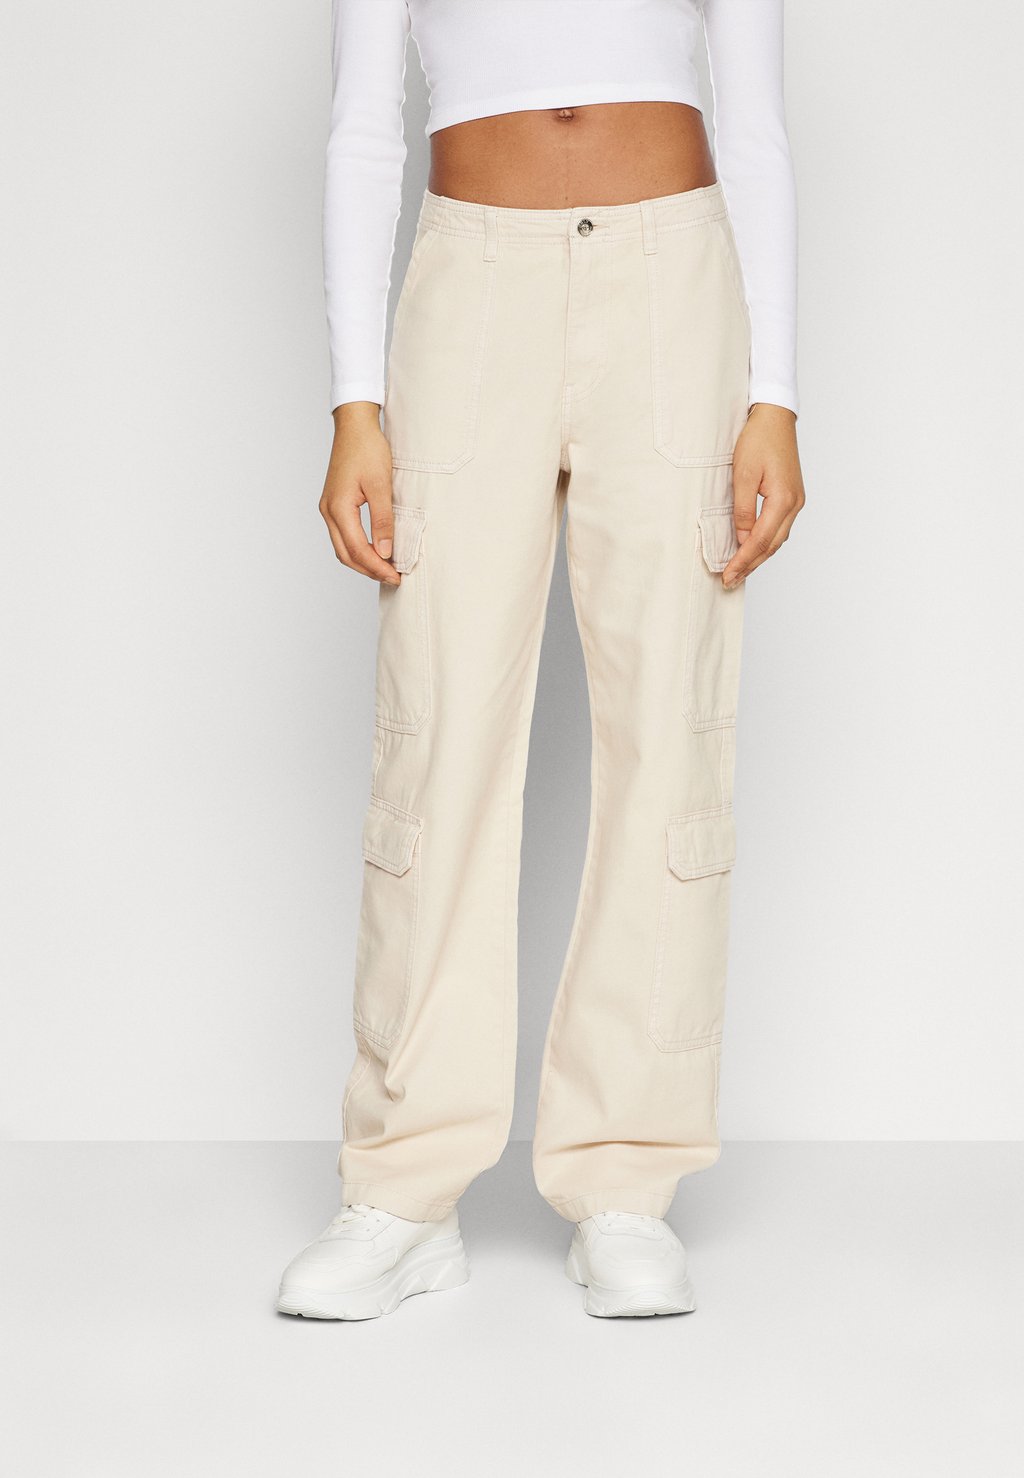 Брюки карго ONLMALFY PANT ONLY, цвет pumice stone брюки карго onlmalfy pant only цвет kalamata